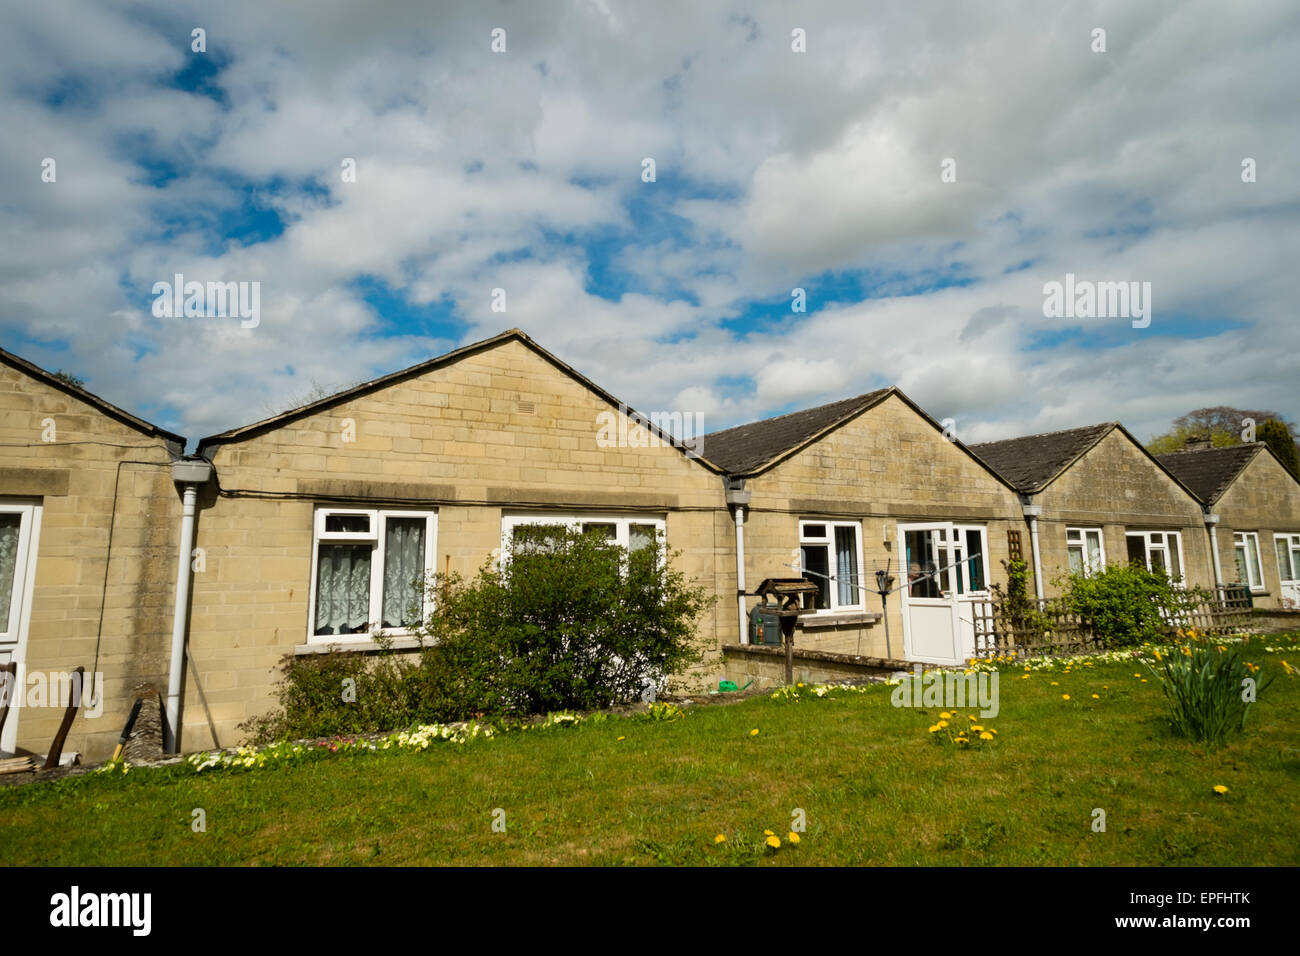 A row of small bungalow style homes for the elderly in Cirencester, Gloucestershire, England UK Stock Photo